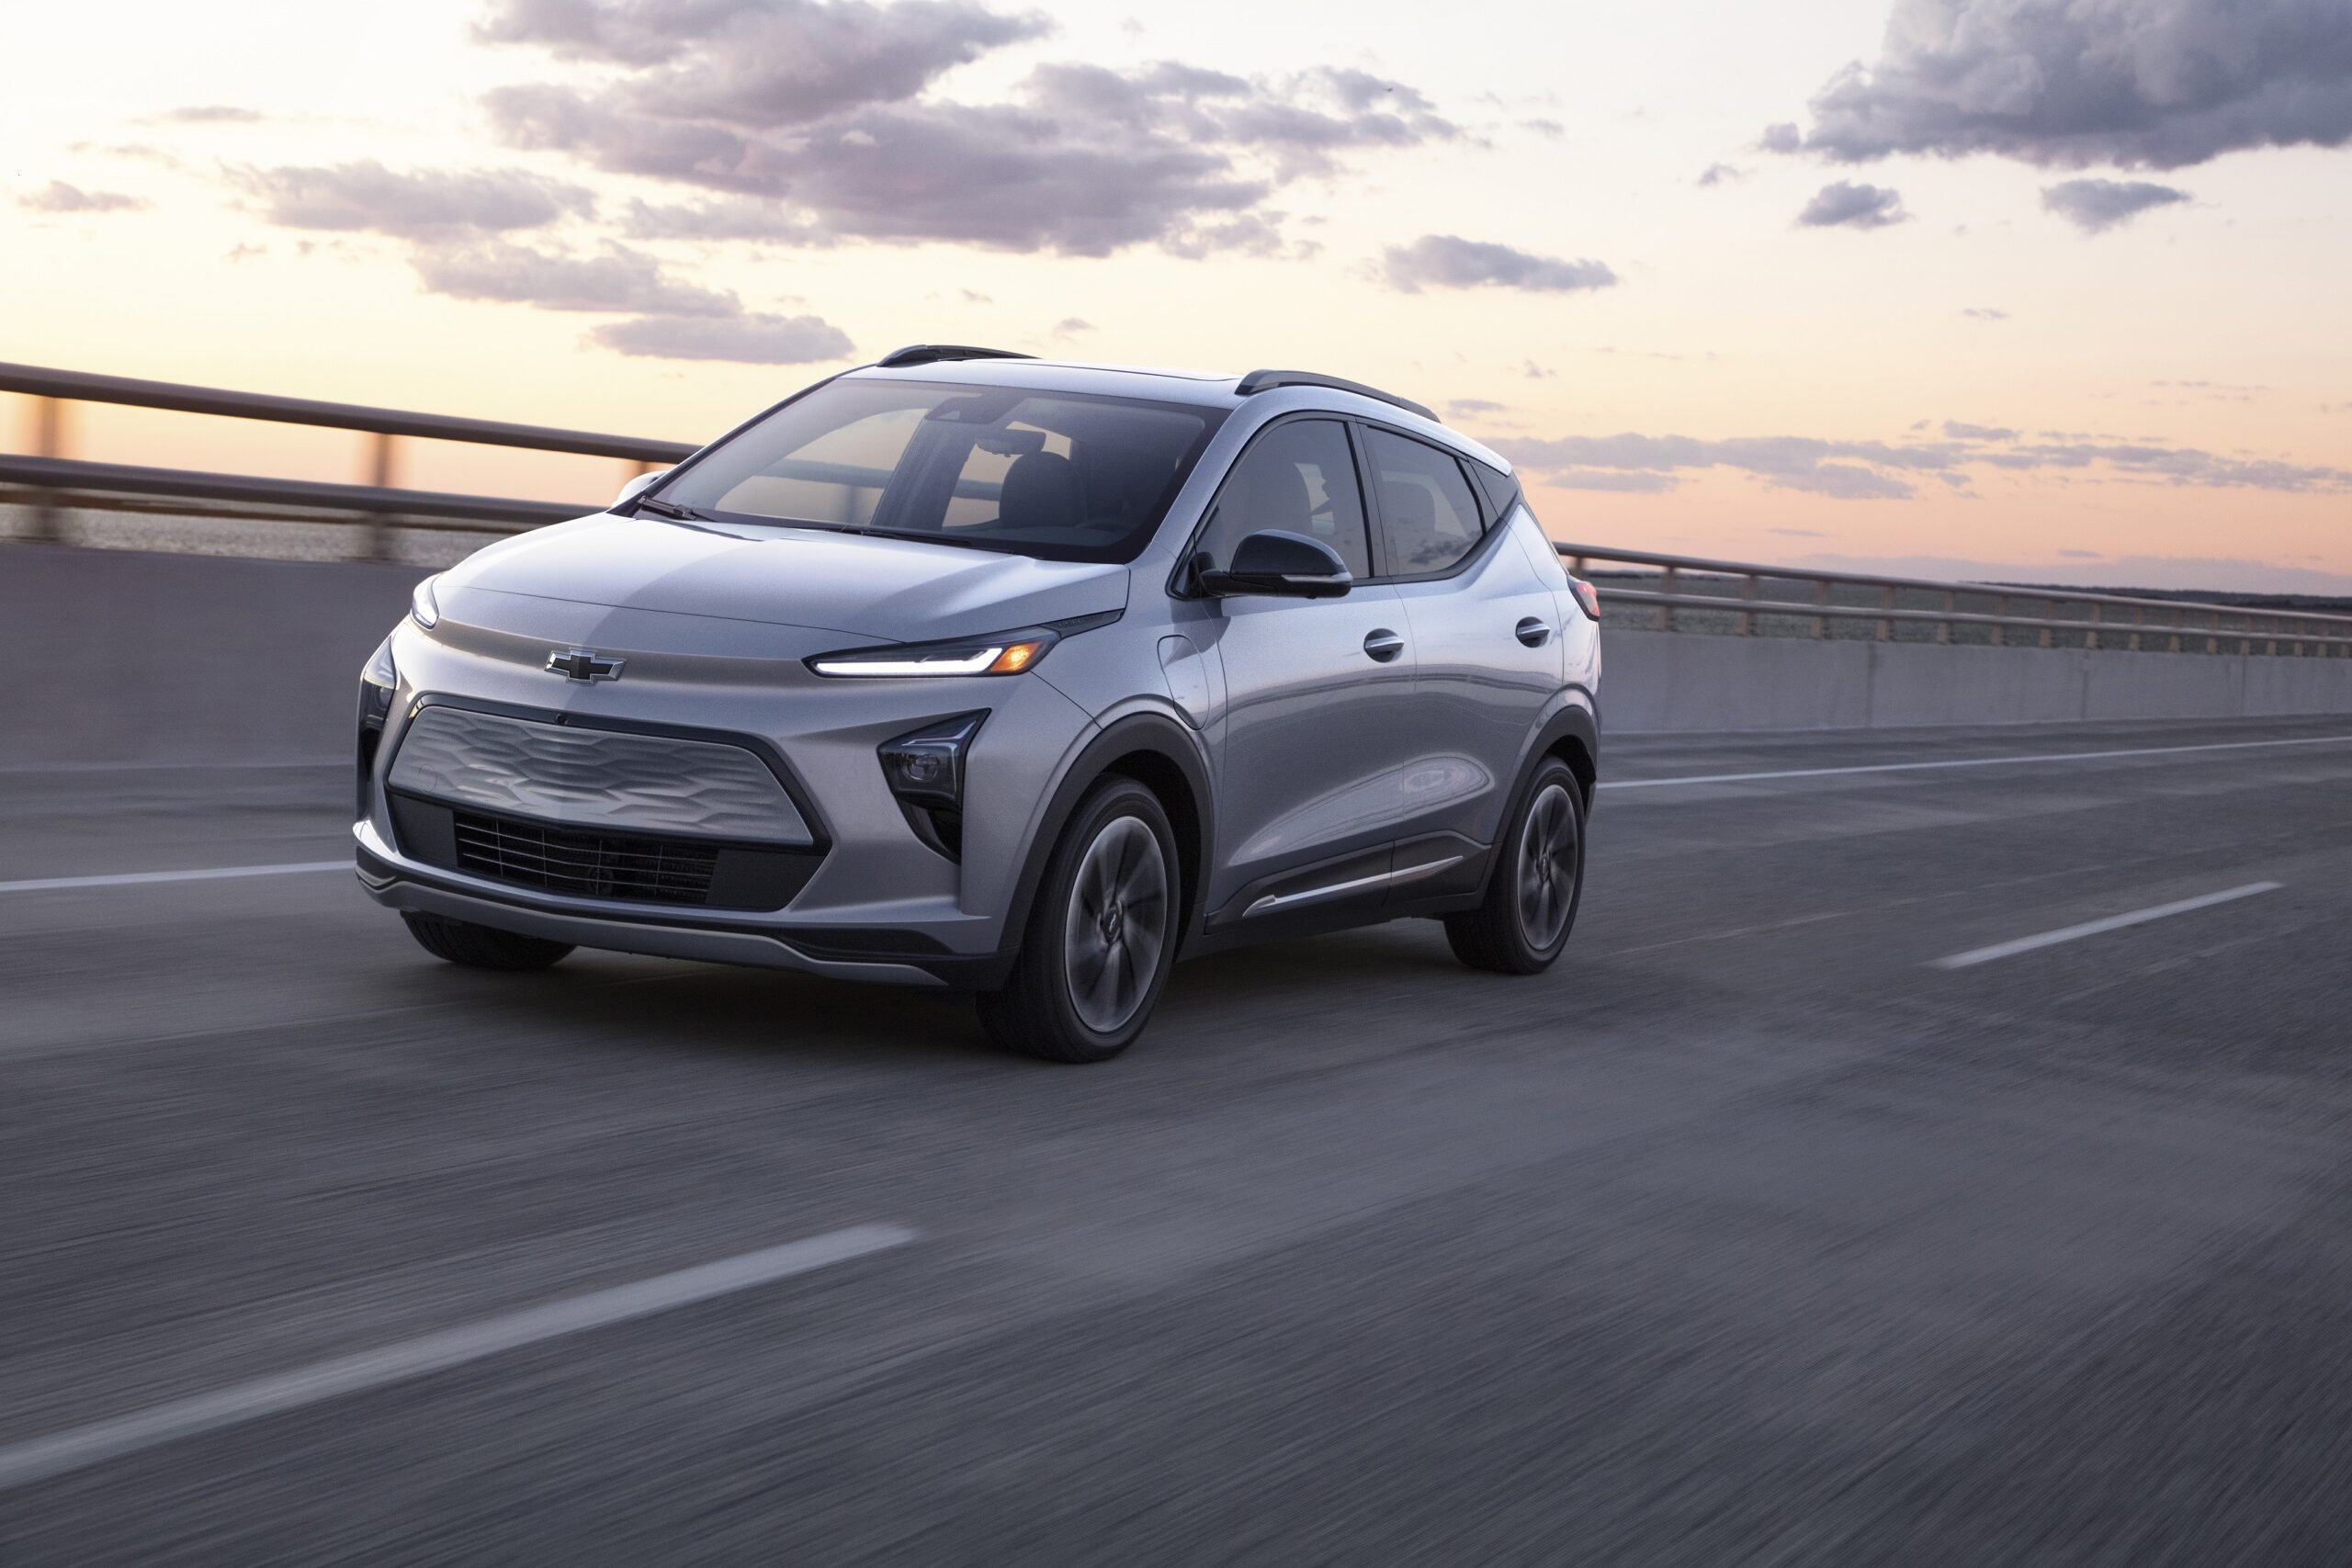 The 2022 Chevrolet Bolt EUV makes first public appearance in UAE